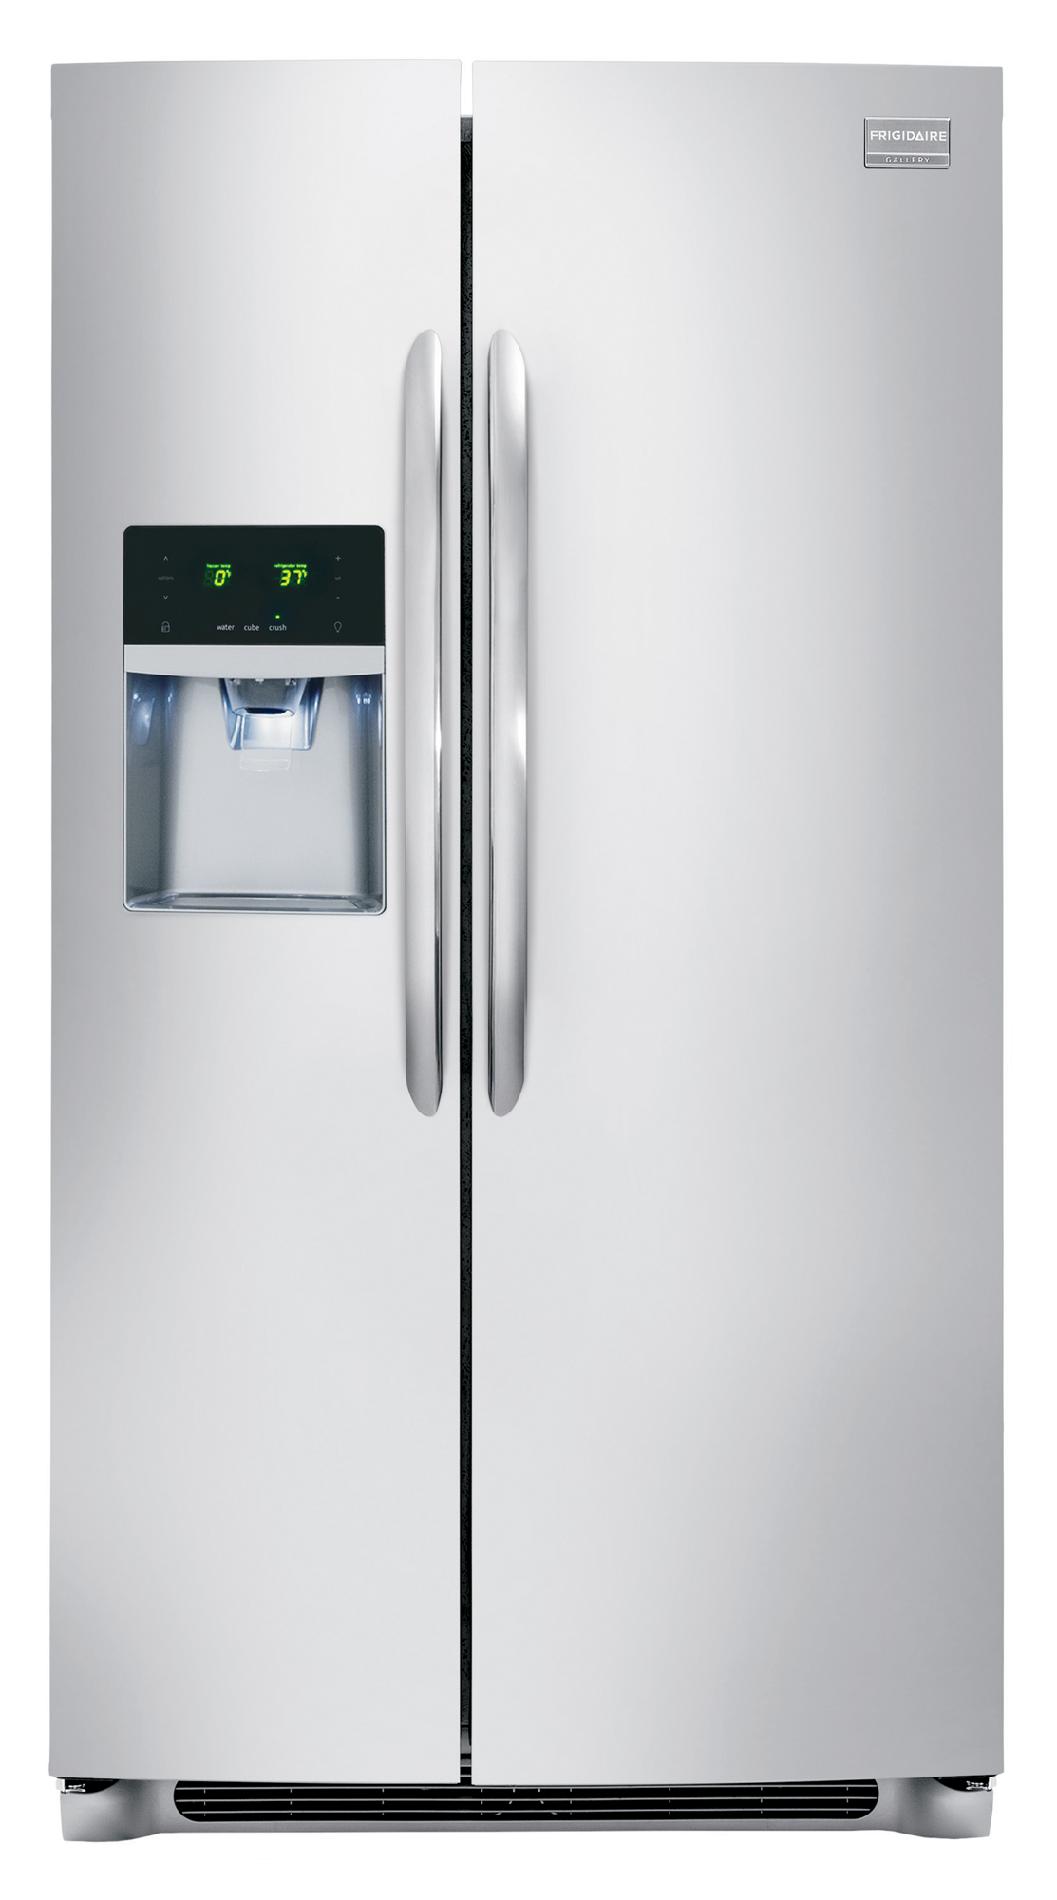 Frigidaire Gallery 26 cu. ft. Side-by-Side Refrigerator - Stainless Steel